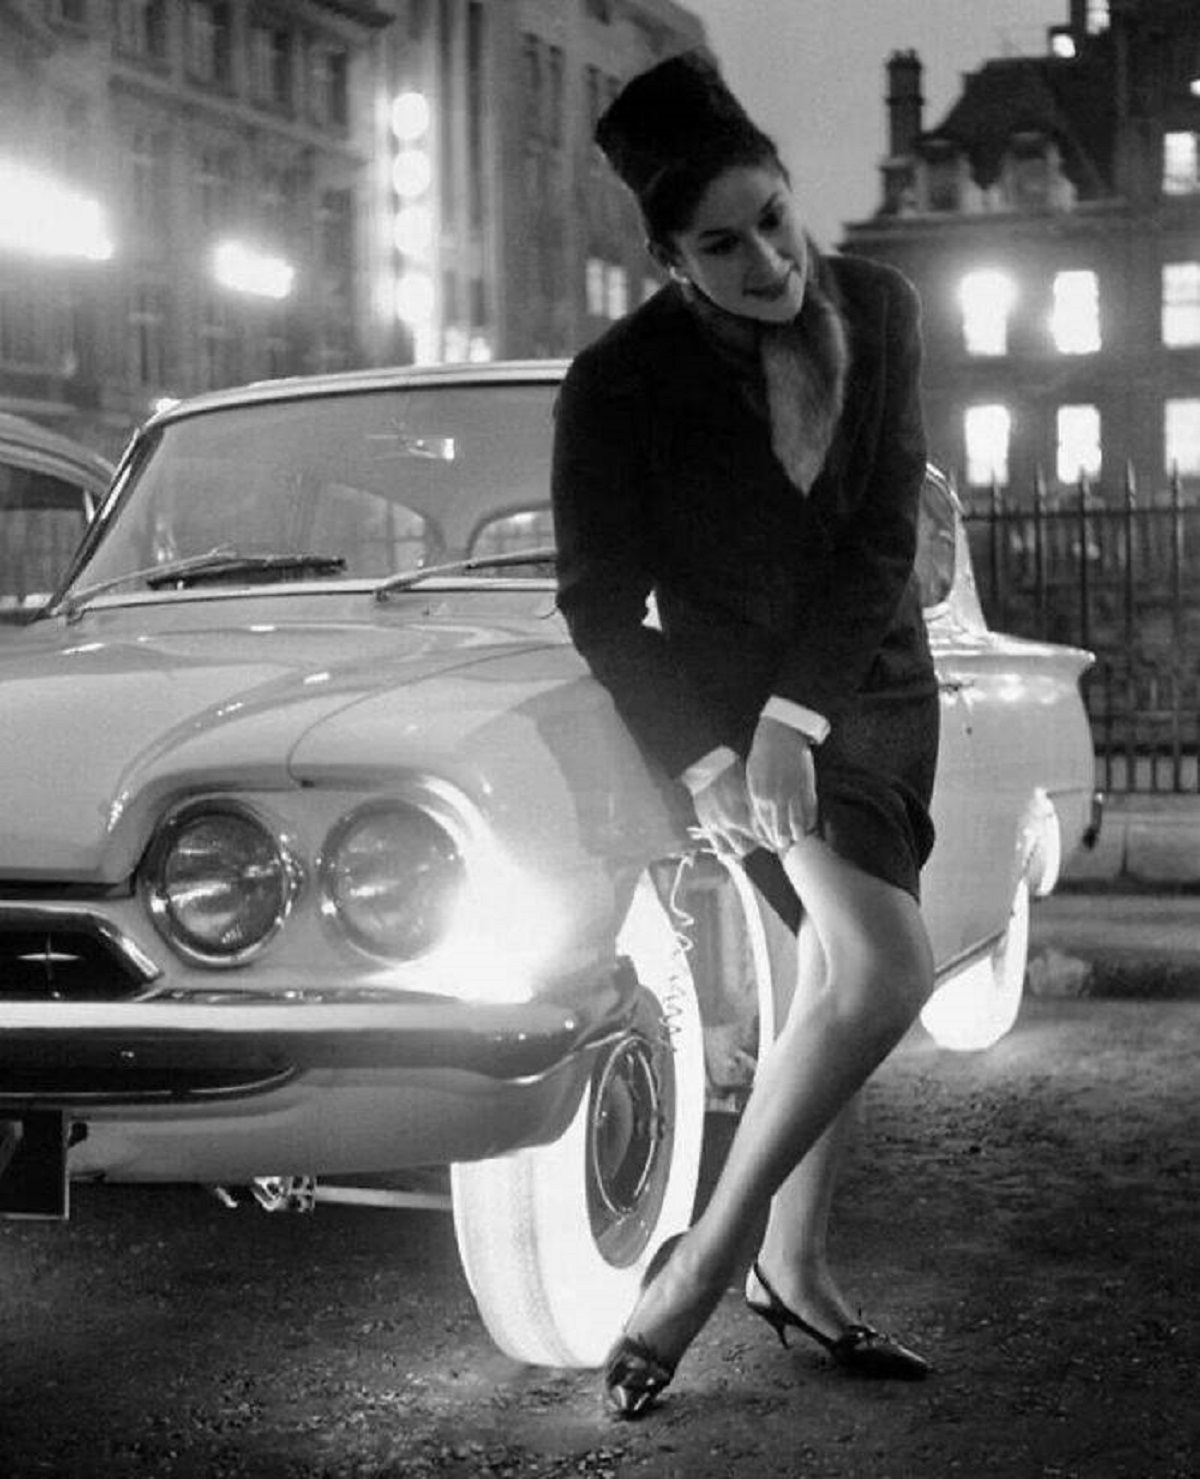 "Goodyear’s Illuminated Tires - A Woman Adjusts Her Stocking Using The Light Emitted By The Goodyear Tire On An October Night In 1961"